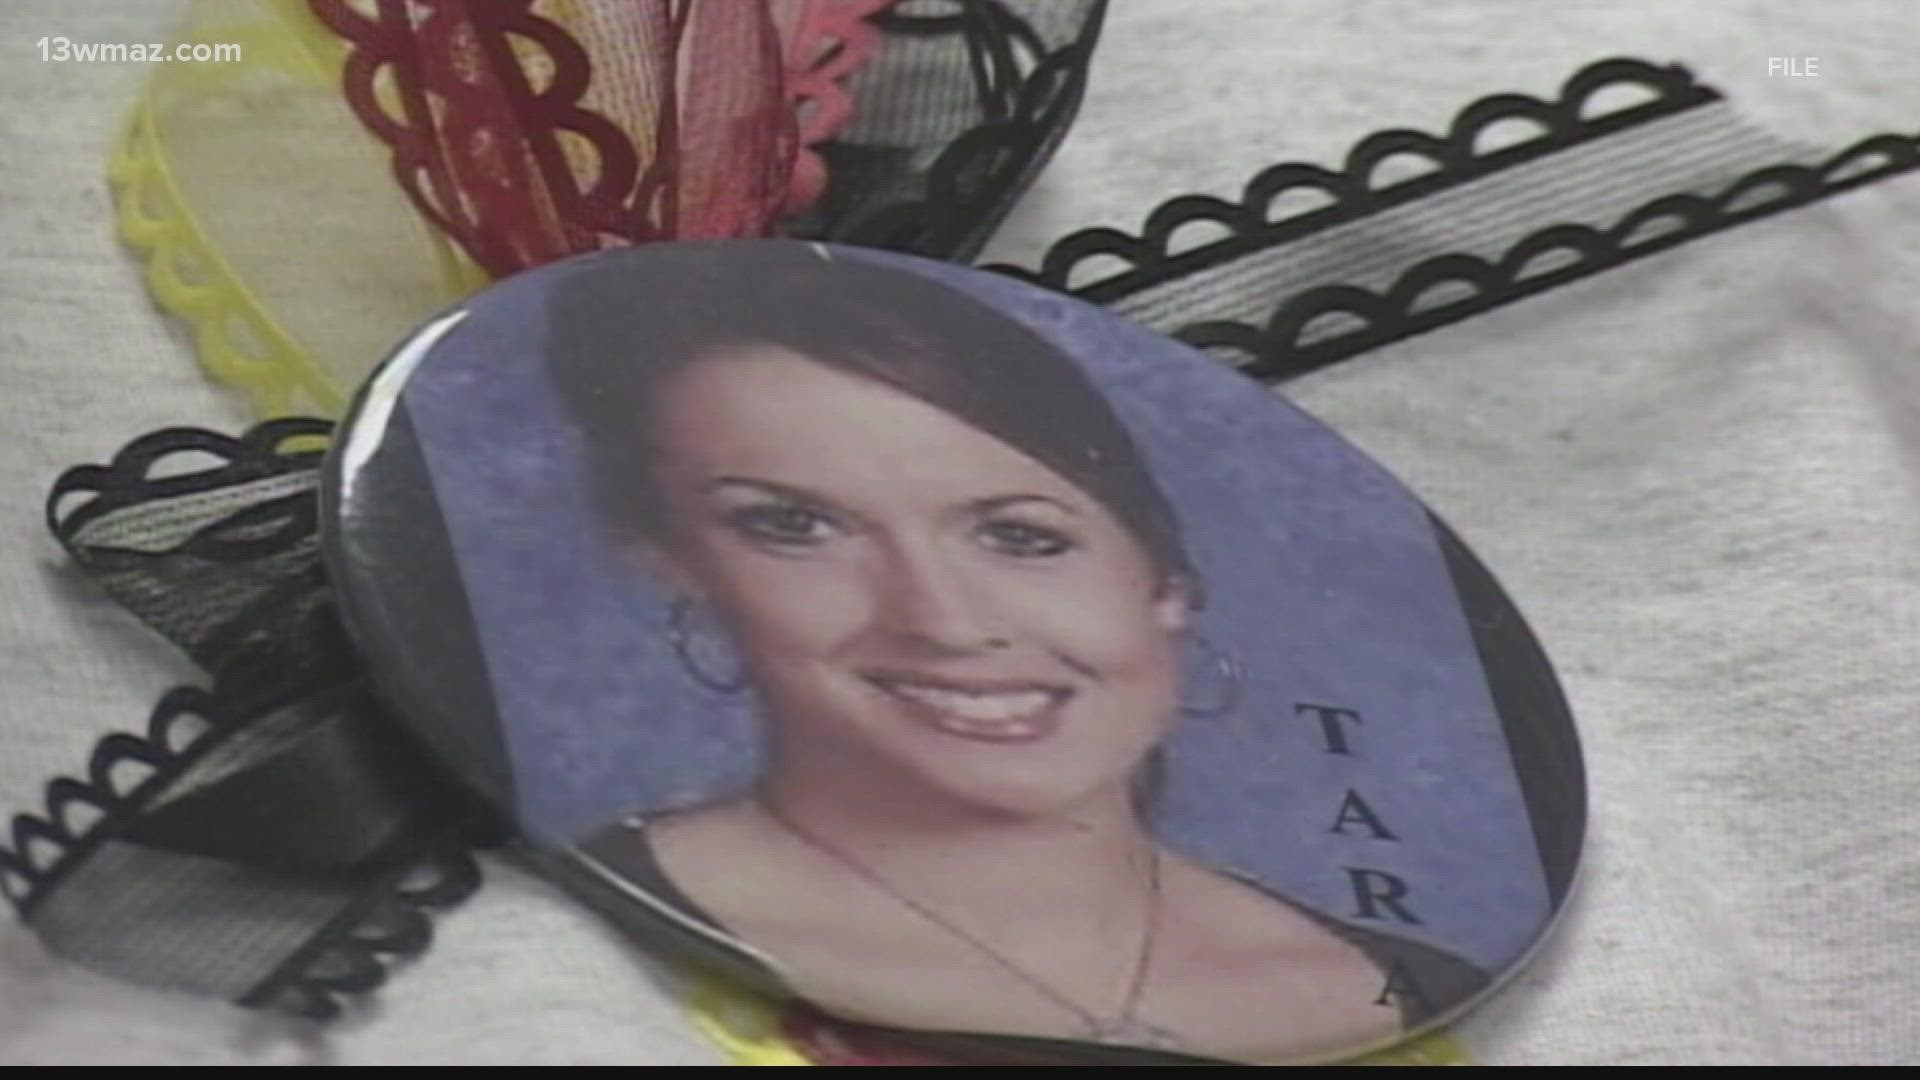 The man accused of killing Tara Grinstead 16 years ago is set to face trial this spring.